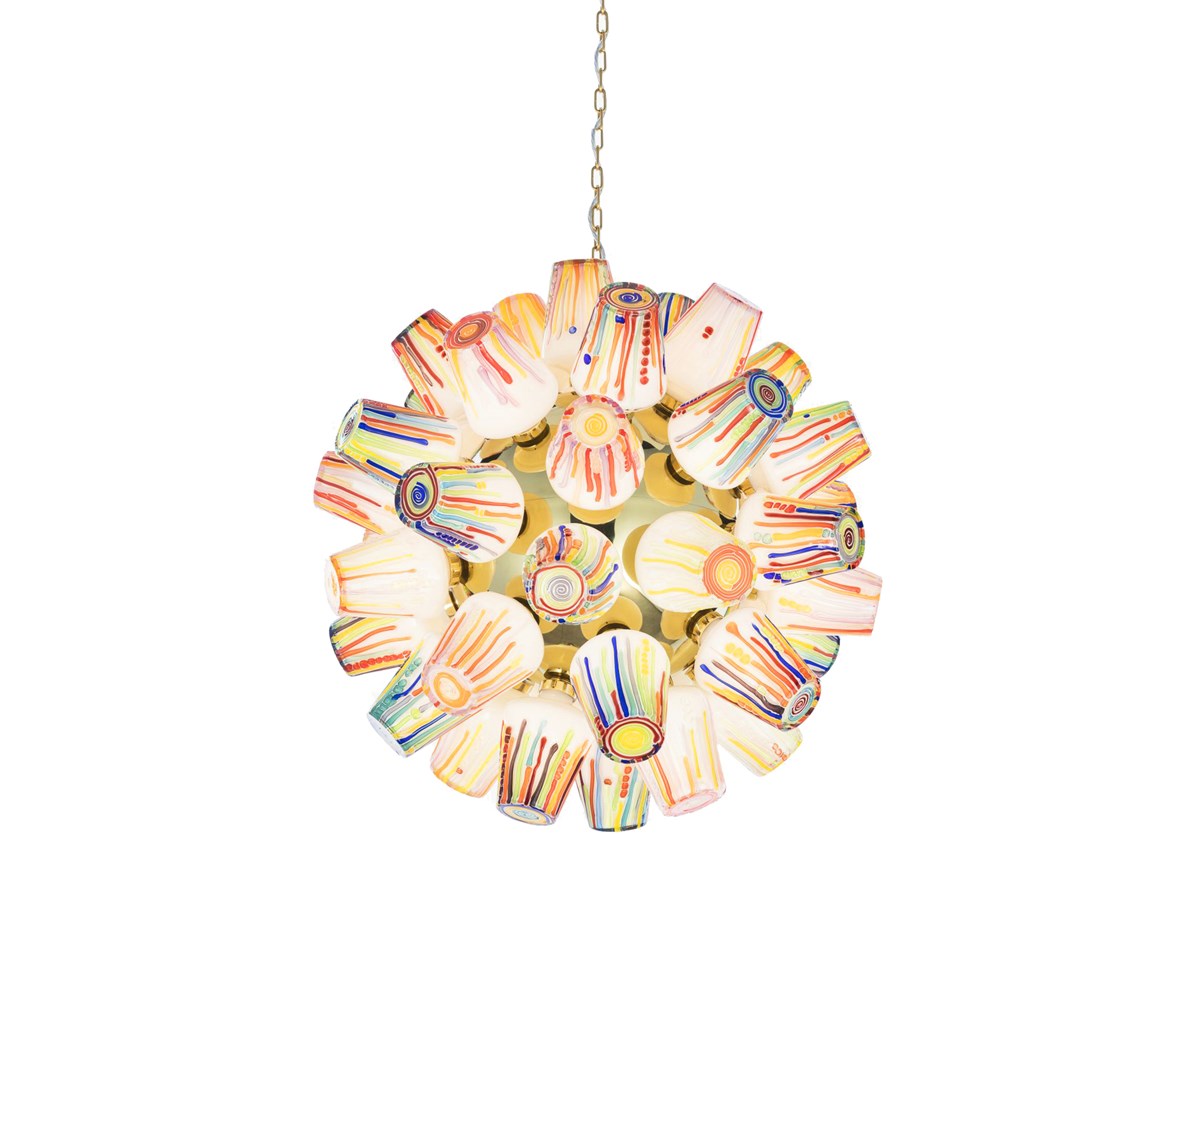 THIS002 Candy Sculpture Sphere Chandelier CL013SA 1CE00 9906S1 F 1920